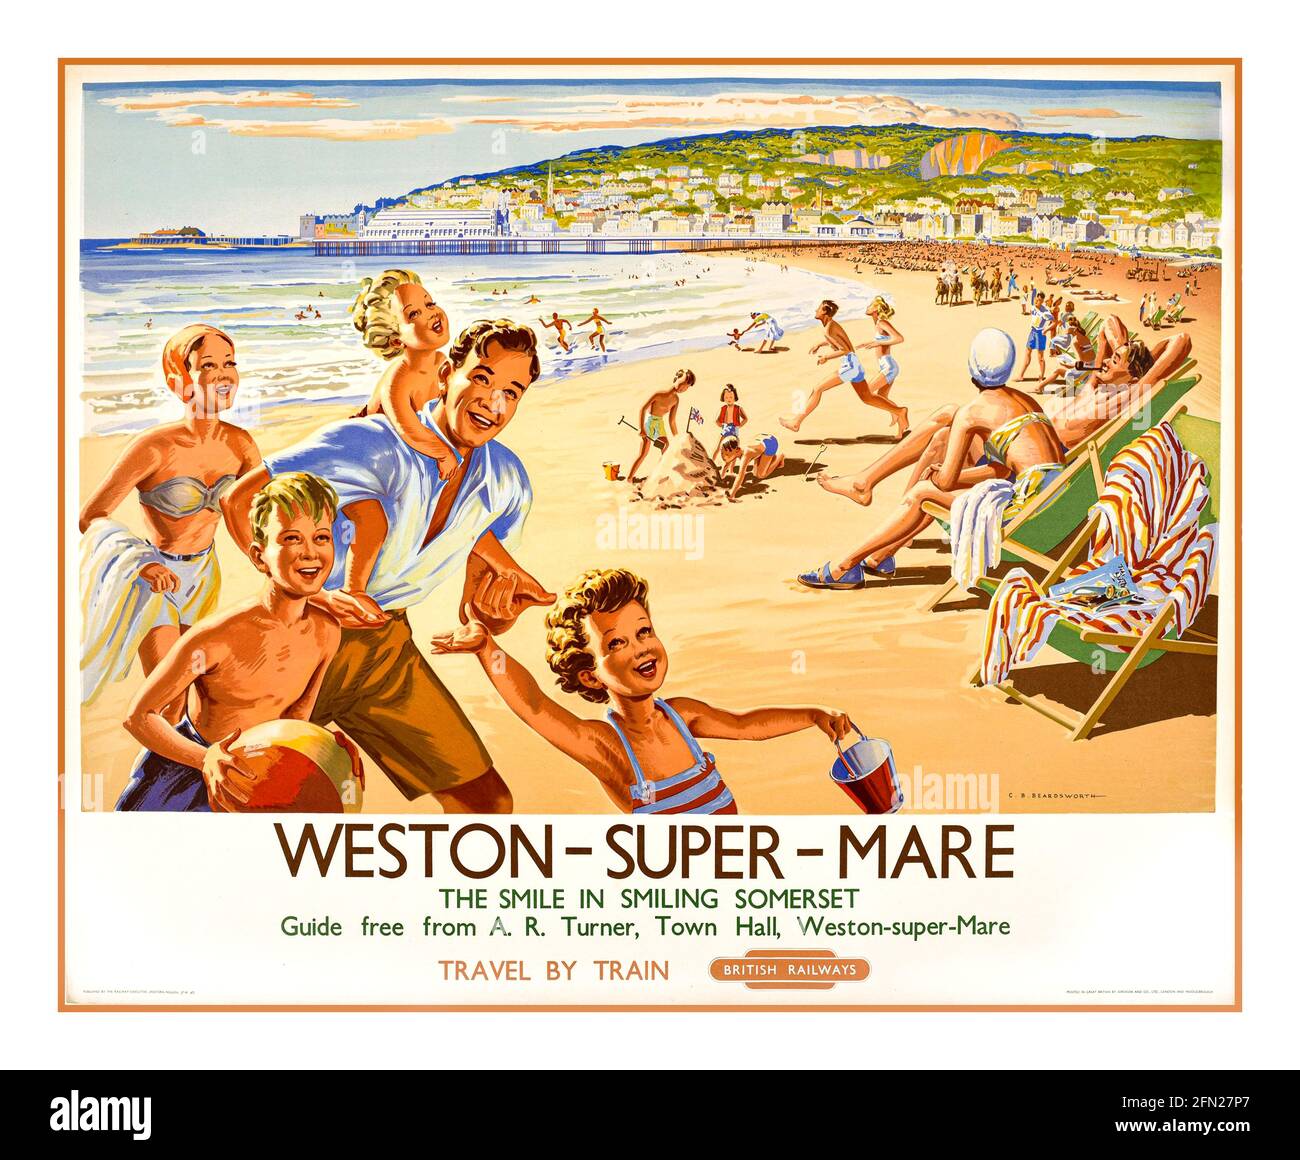 Vintage 1950’s Weston-super-Mare Railway Poster 1959 Artist:  C B Beardsworth Weston-super-Mare. The smile in smiling Somerset. Guide free from A.R. Turner, Town Hall, Weston-super-Mare. Travel by train. British Railways. Stock Photo